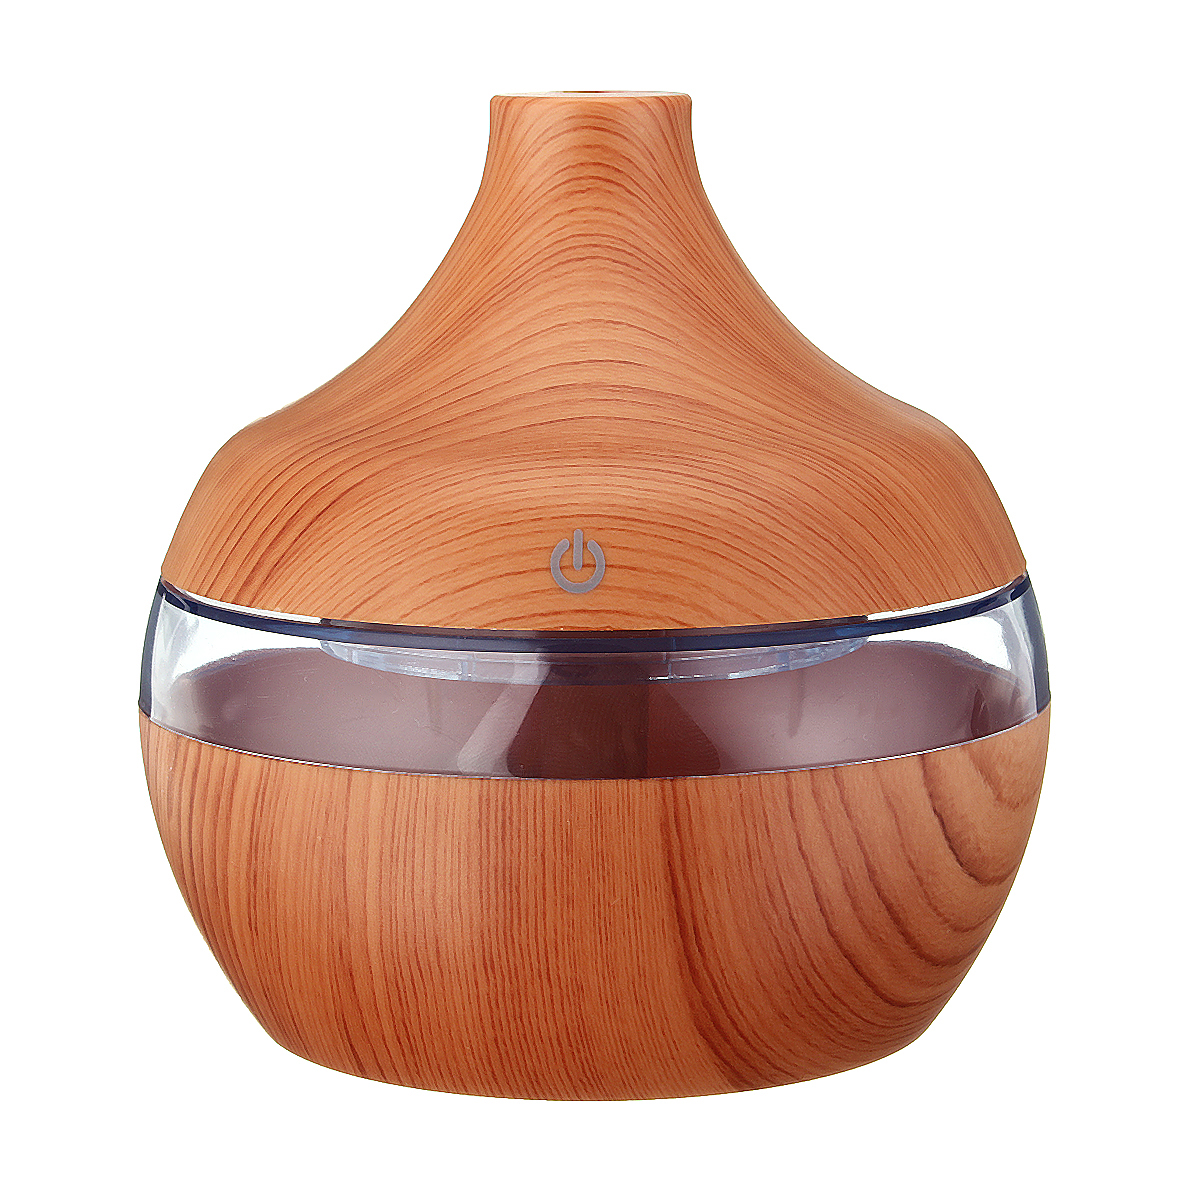 

Intelligent Induction LED USB Wood Grain Ultrasonic Air Humidifier Aromatherapy Essential Oil Diffuser